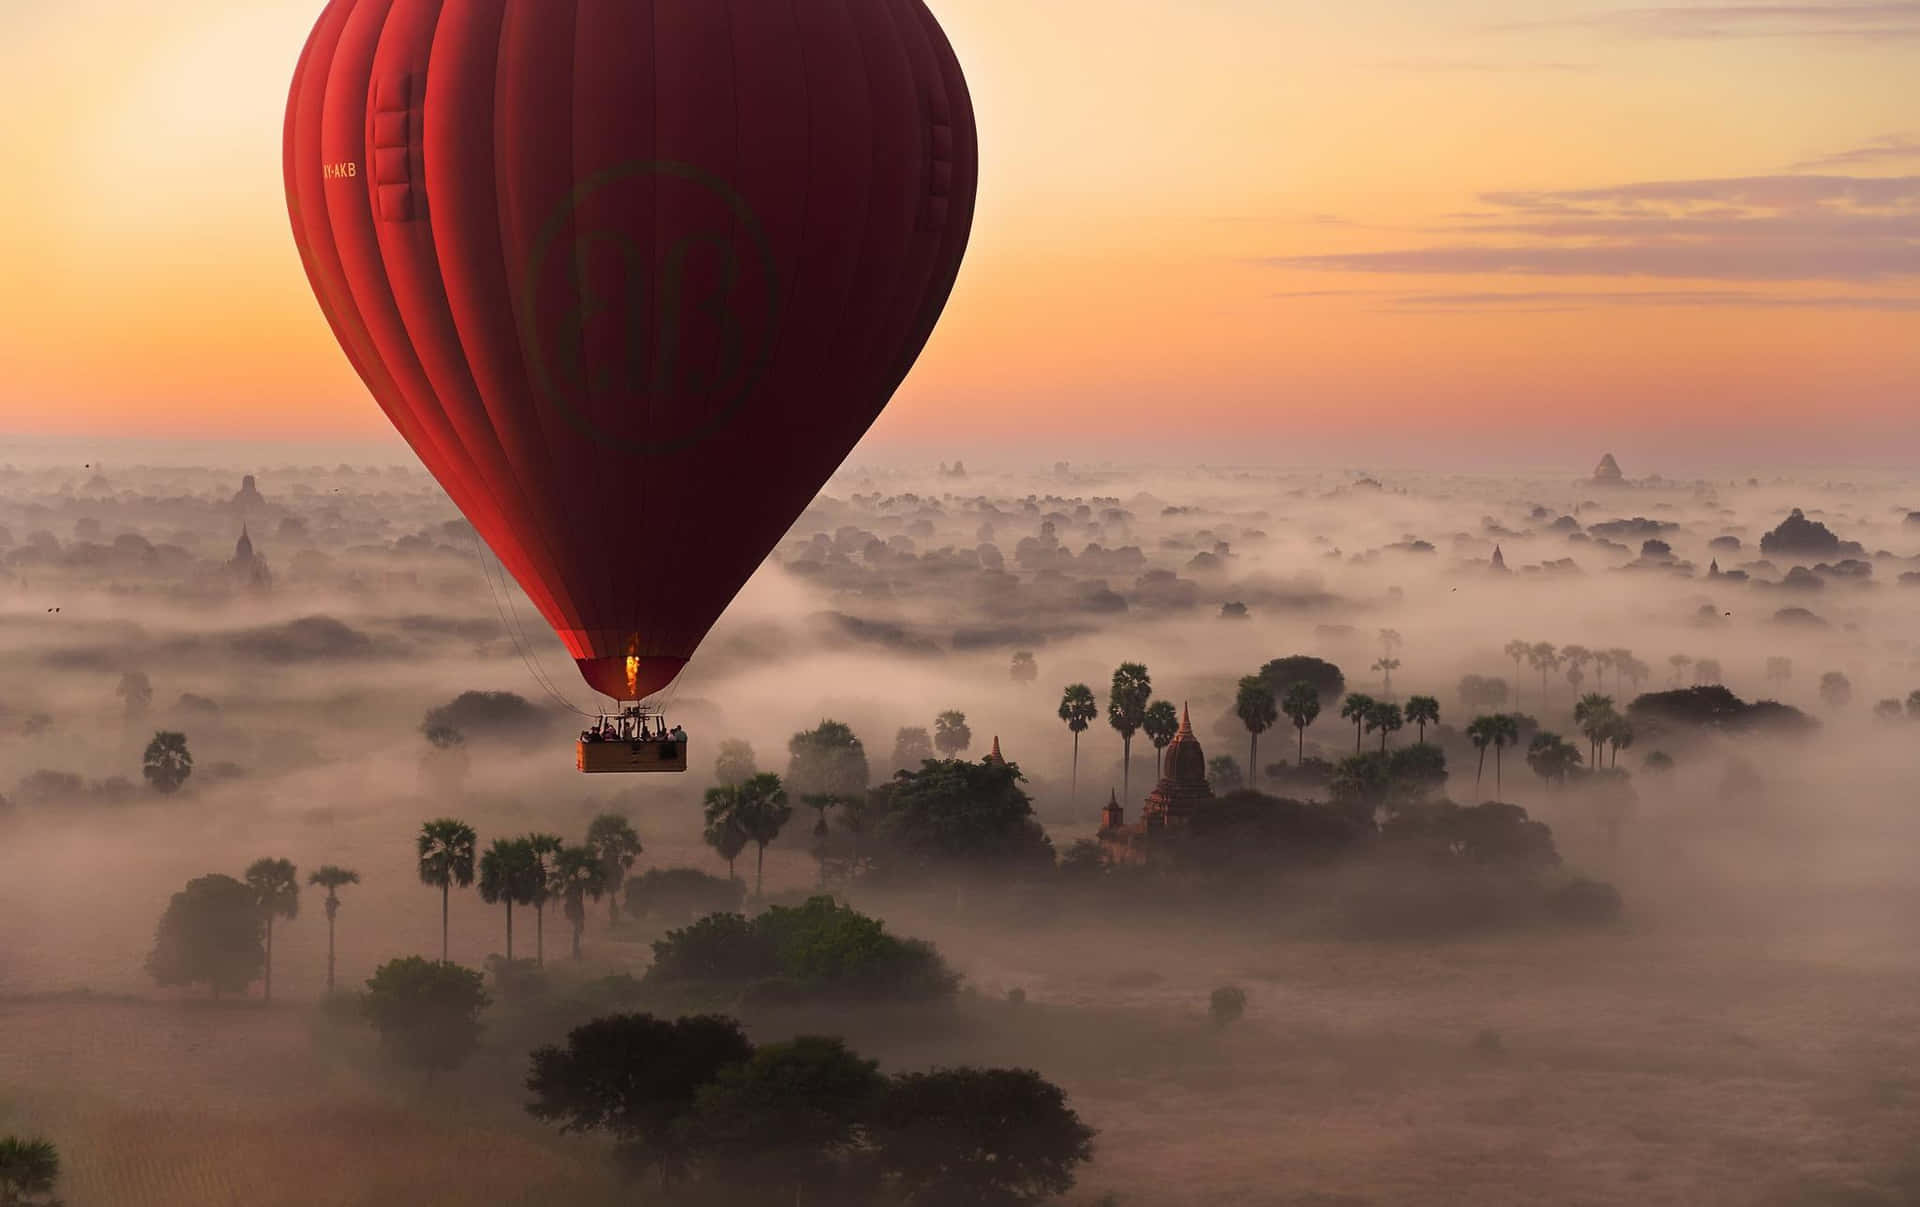 Floating through the skies in a colorful hot air balloon